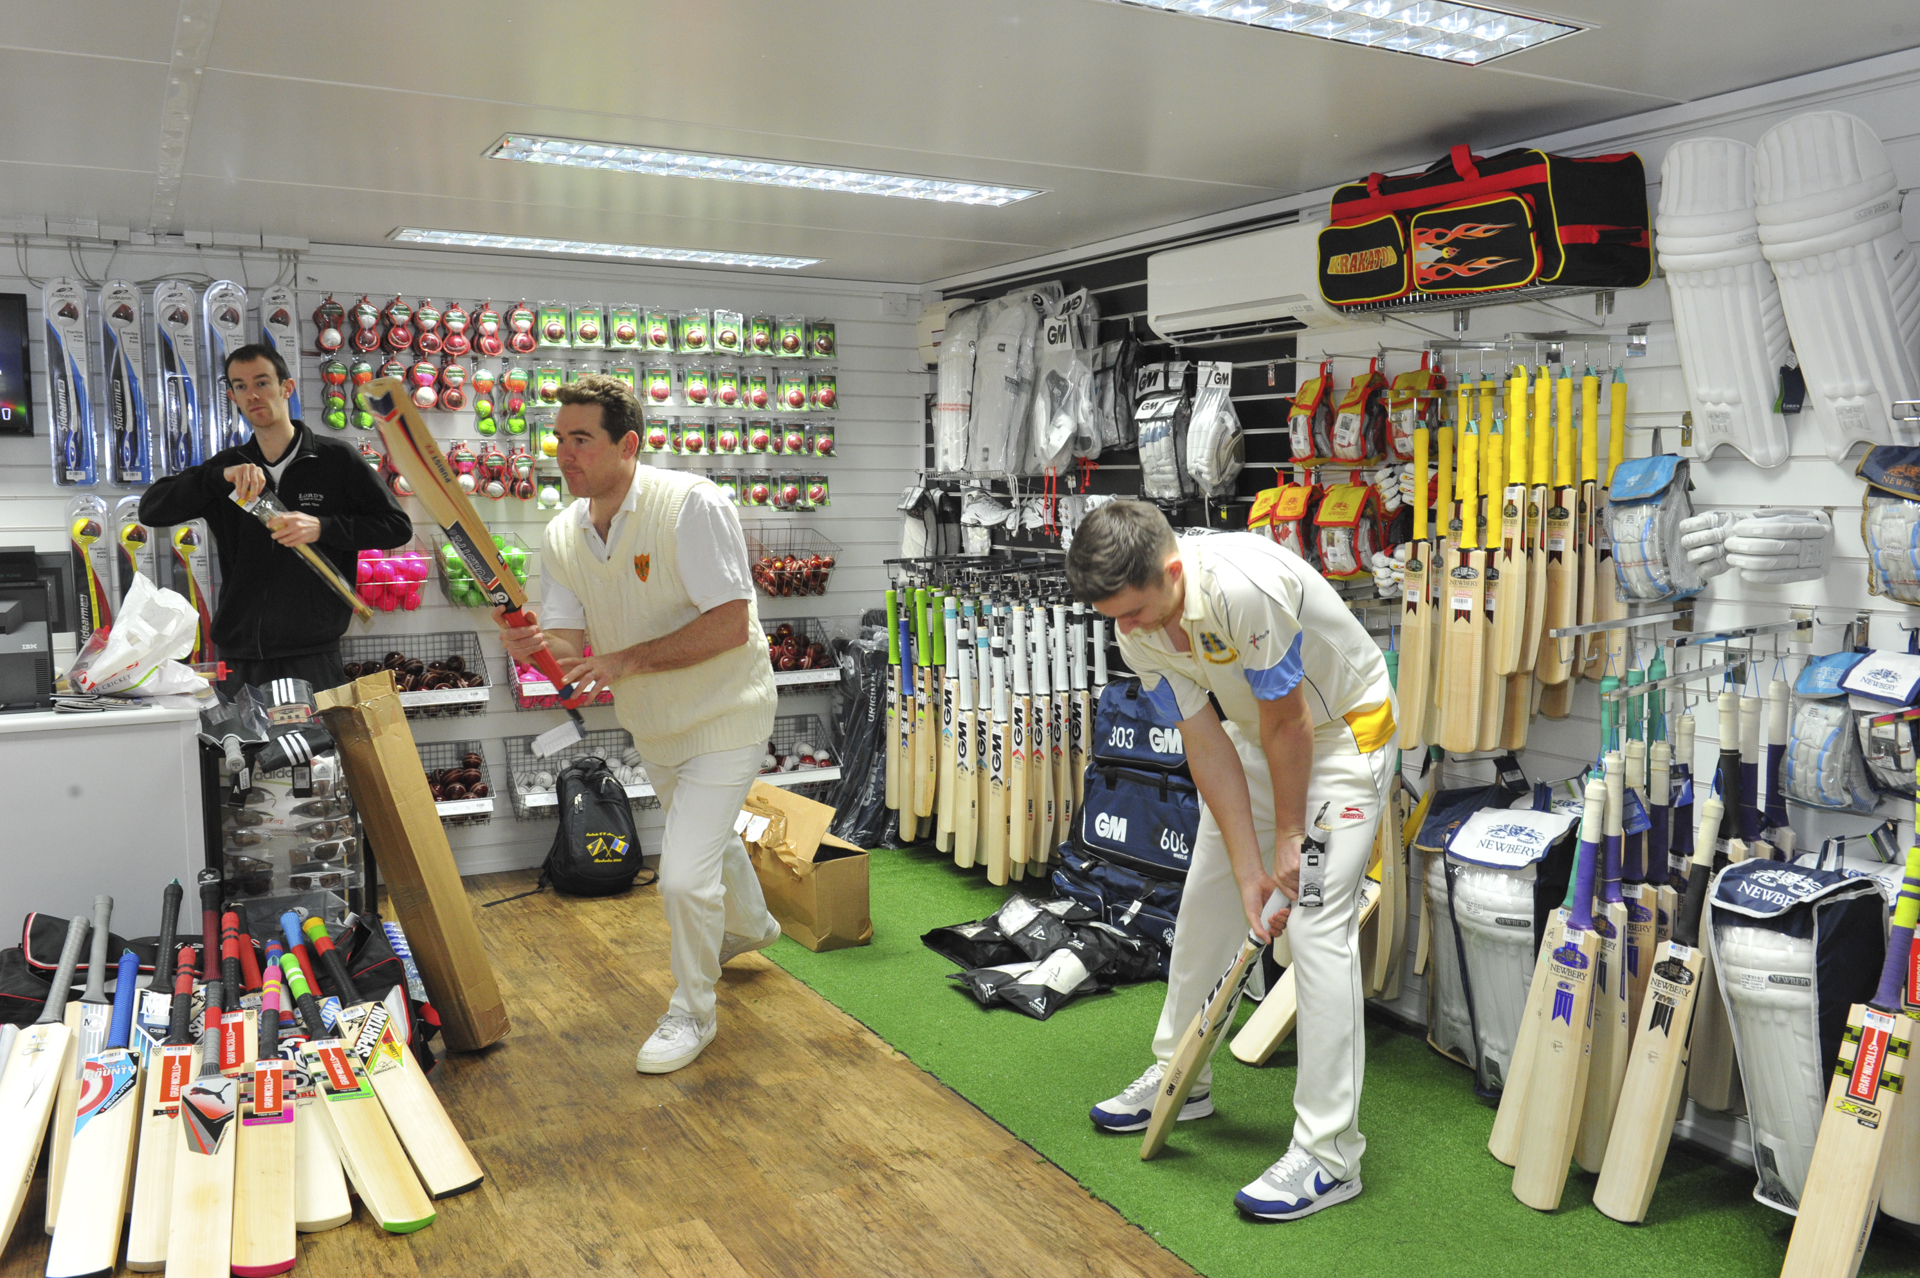 Buy High-Quality Cricket Equipment From Best Cricket Shop